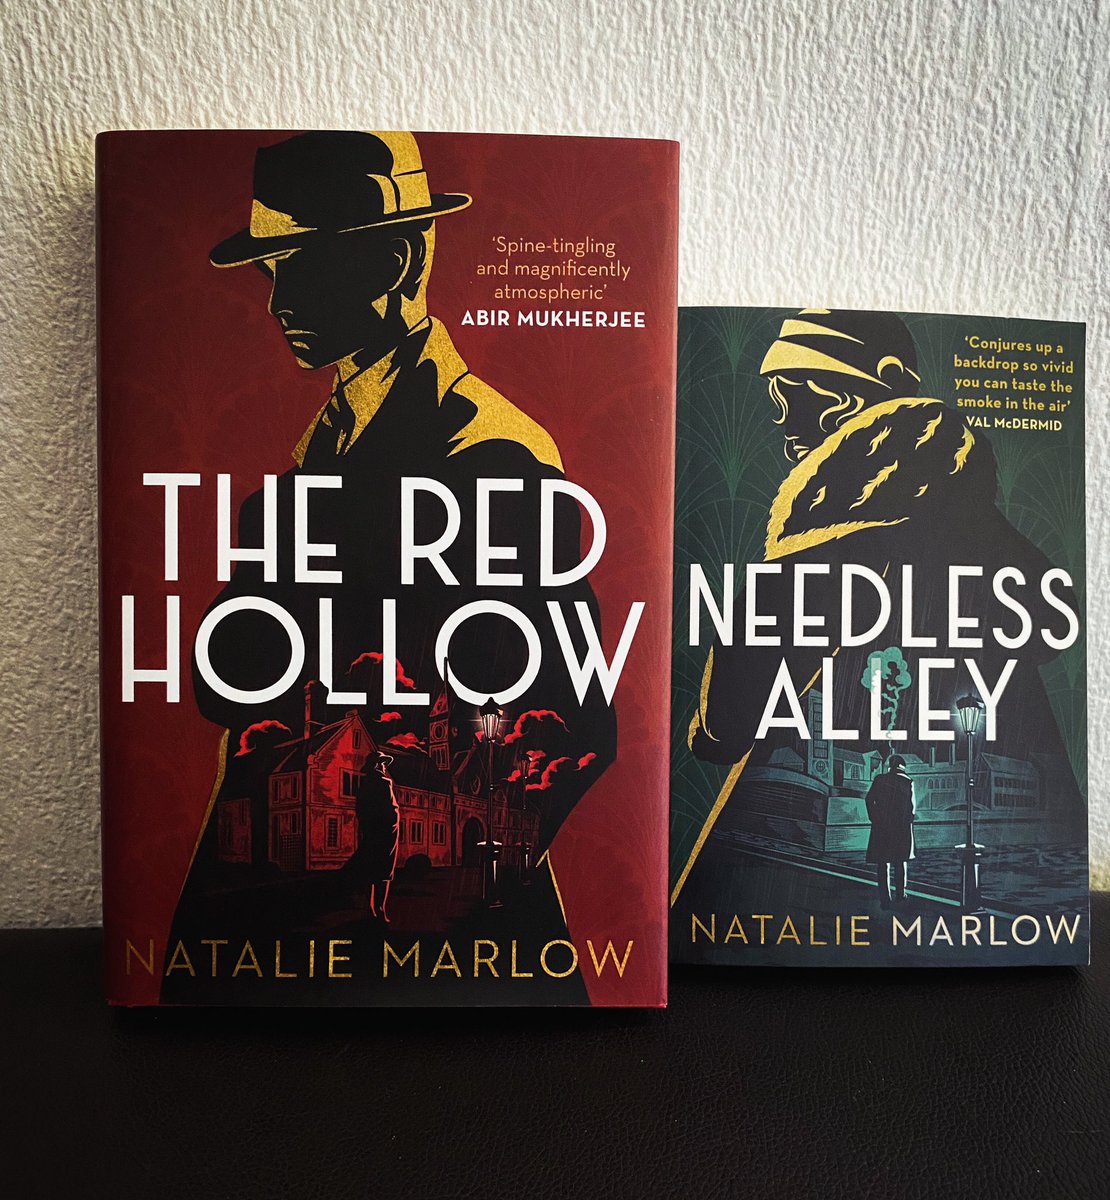 Received these beautiful books from @BaskervilleJMP today and I can’t wait to read them! I do love some noir historical fiction! ♥️